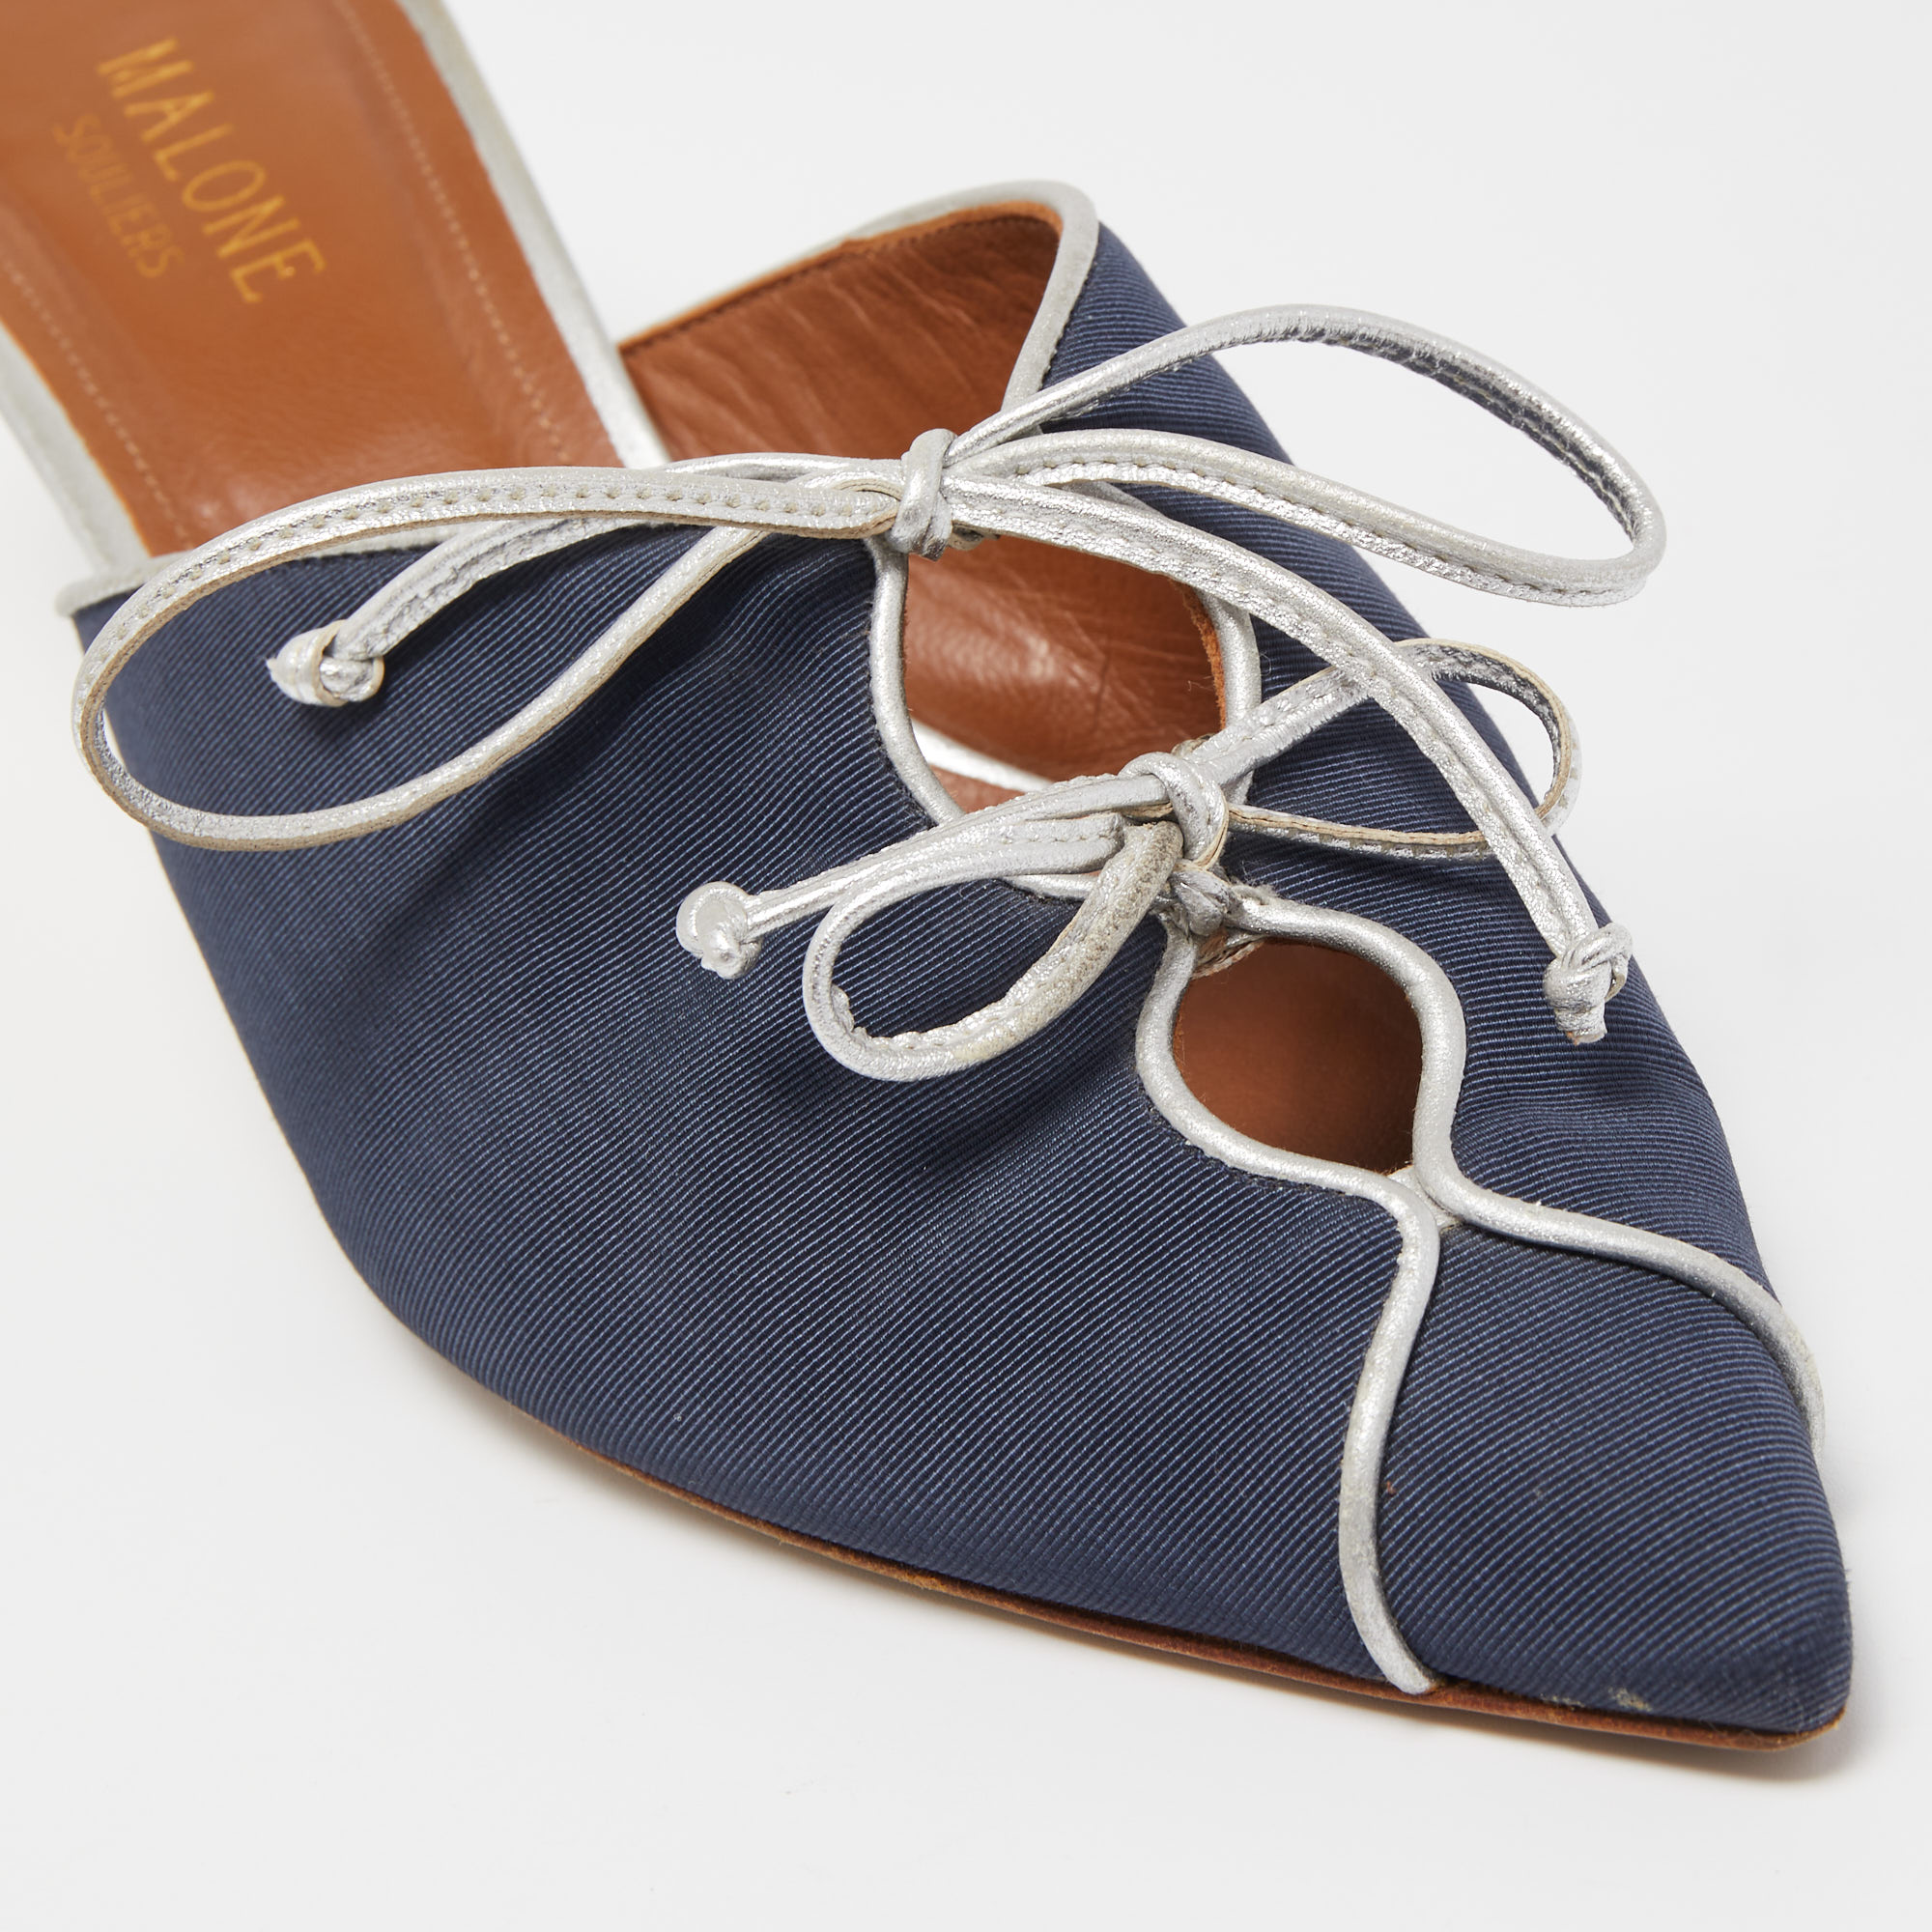 Malone Souliers Navy Blue Canvas Victoria Bow Mules Size 38.5